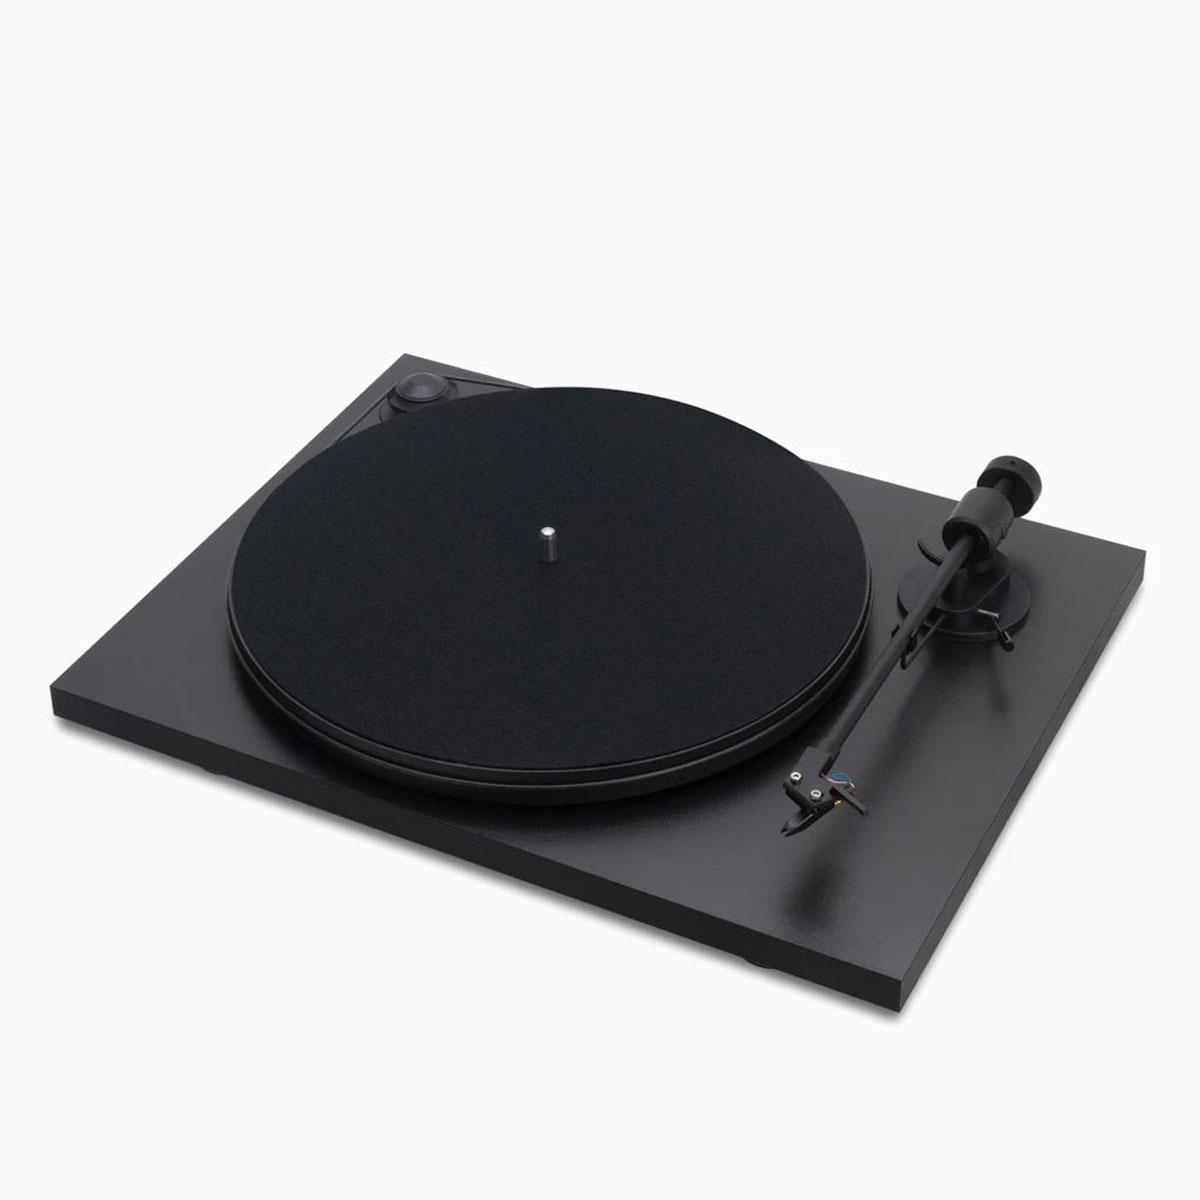 Image of Andover Audio SpinDeck Belt-Drive Turntable